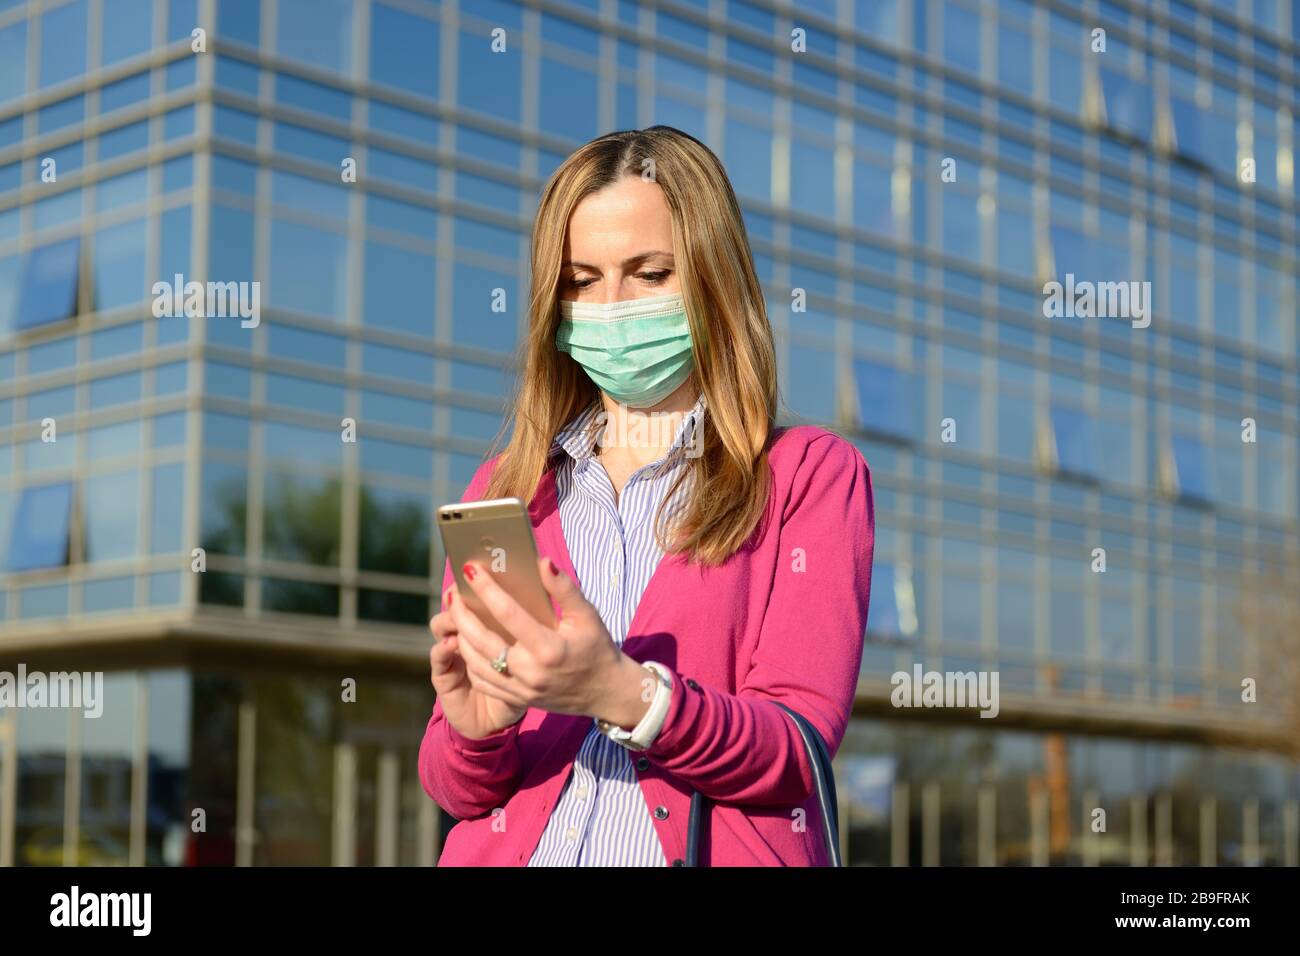 Coronavirus epidemic, woman wearing a protective face mask and using a smartphone in a city street as the number of Covid 19 virus cases across Europe Stock Photo